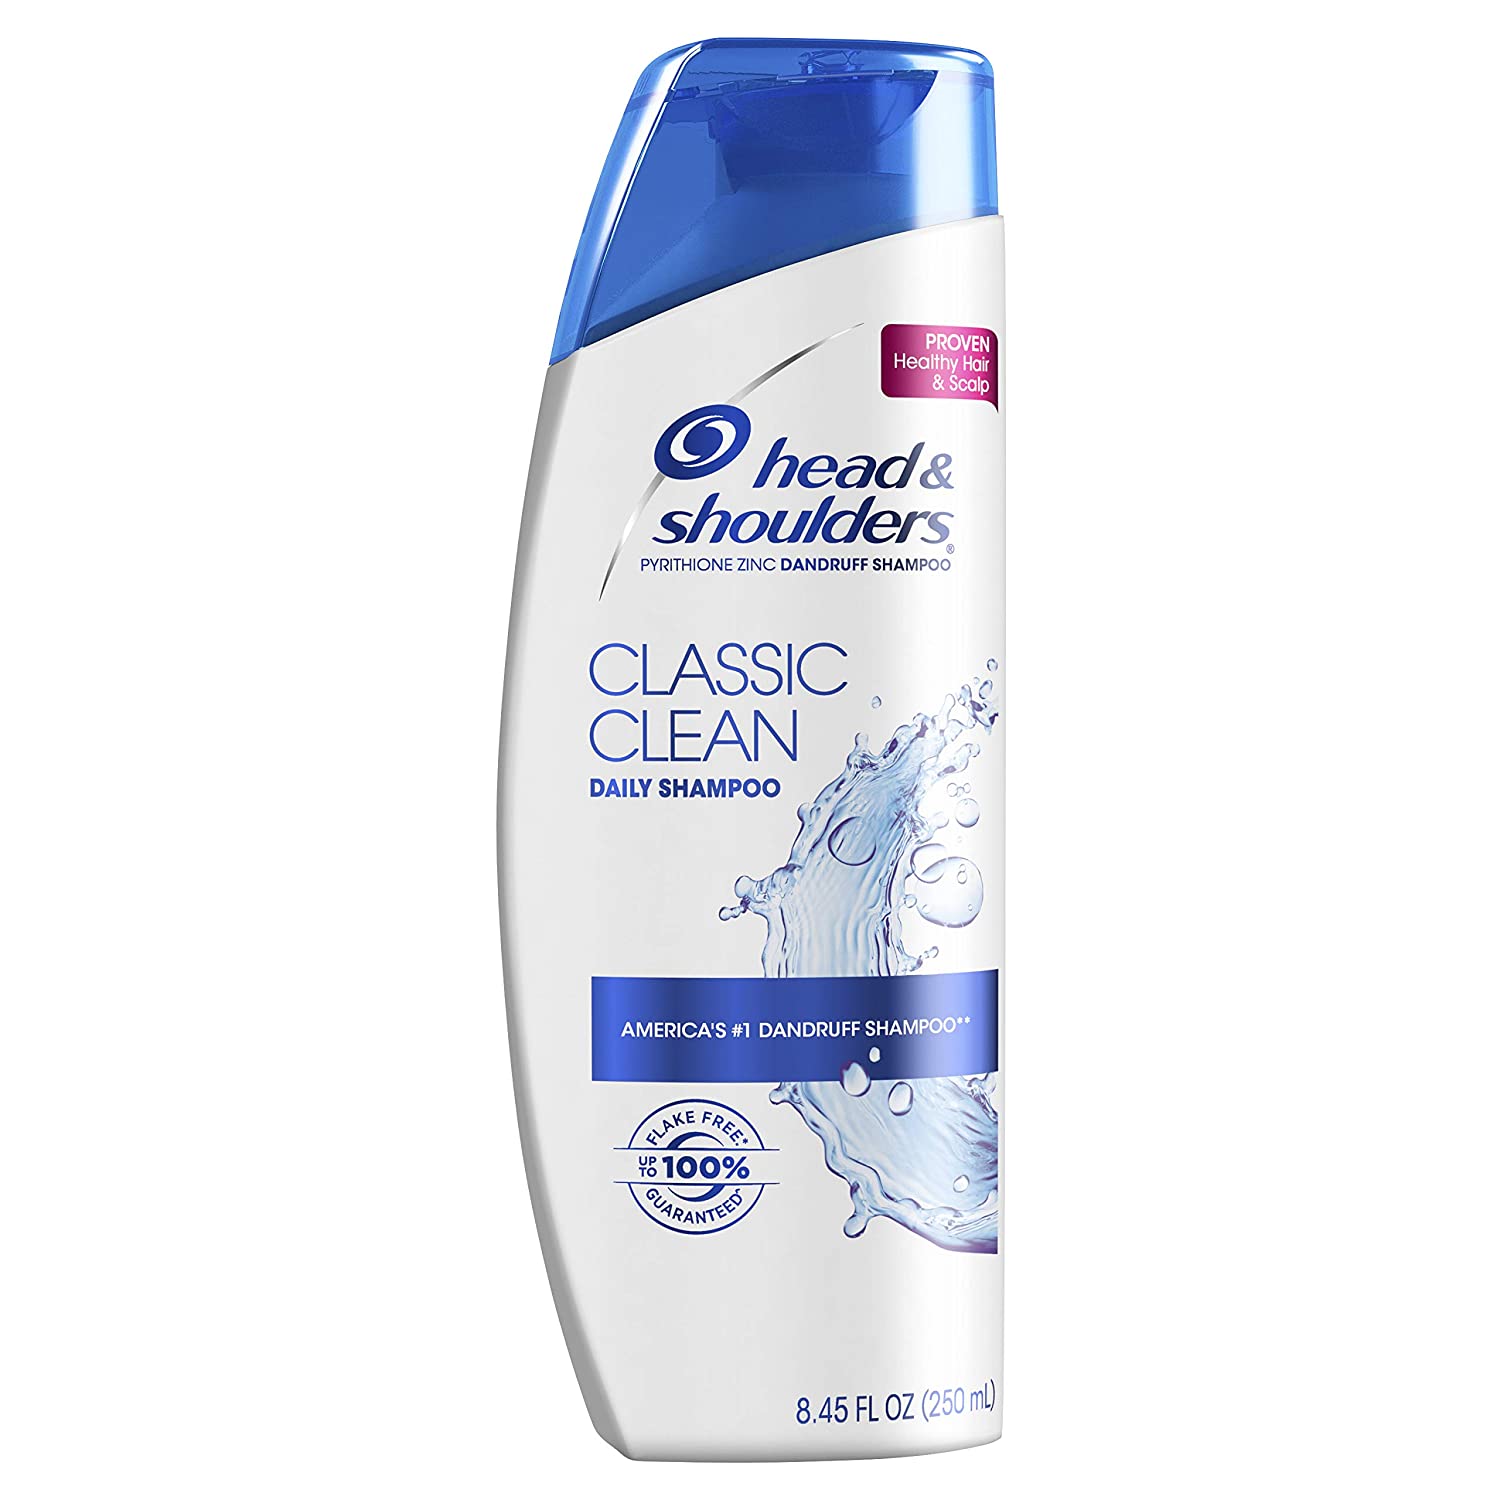  2. Head & Shoulders Dandruff Shampoo is the most affordable option. 